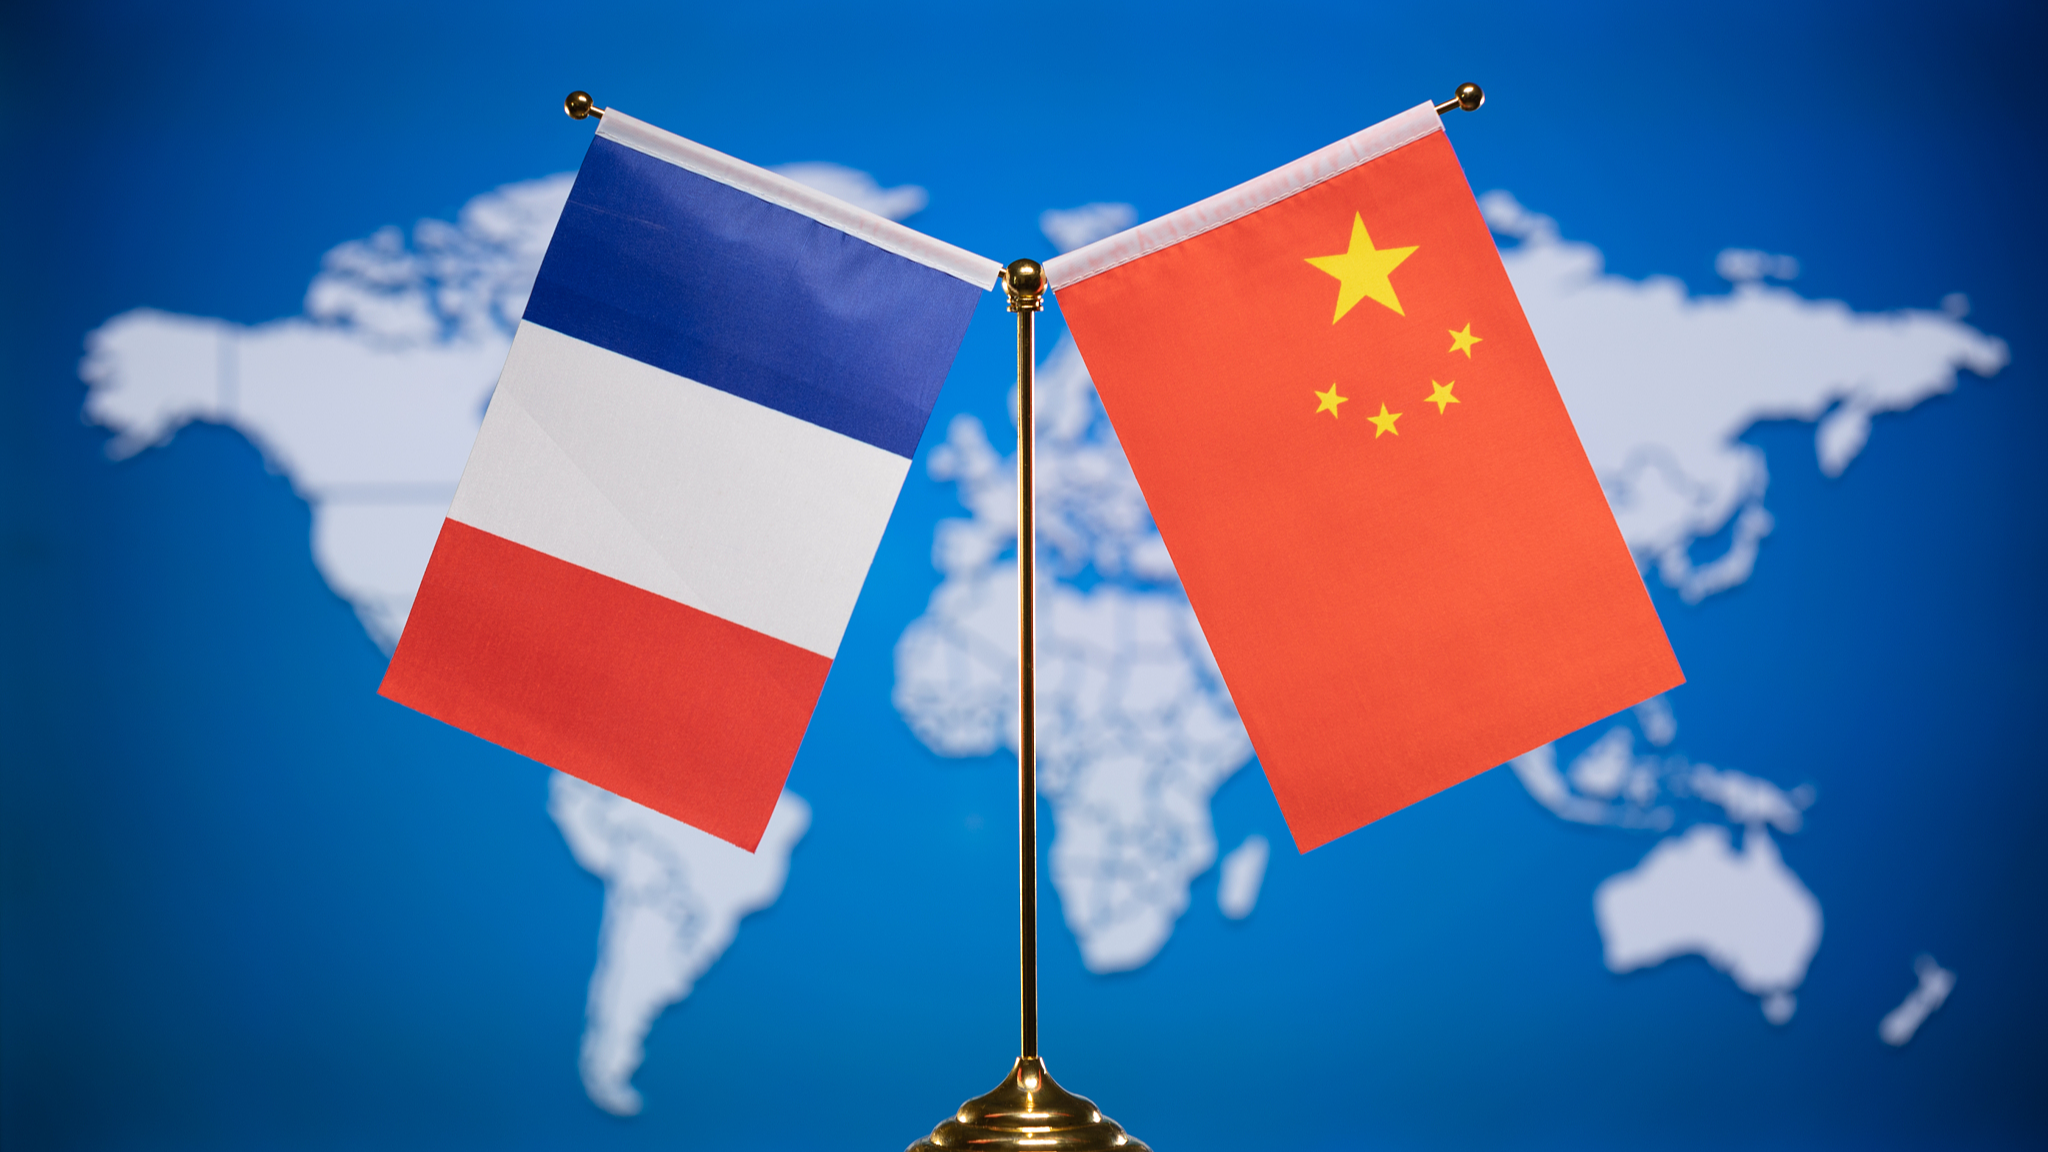 Close partners for 60 years, France and China can work even closer together, says Lu Shaye. /CFP